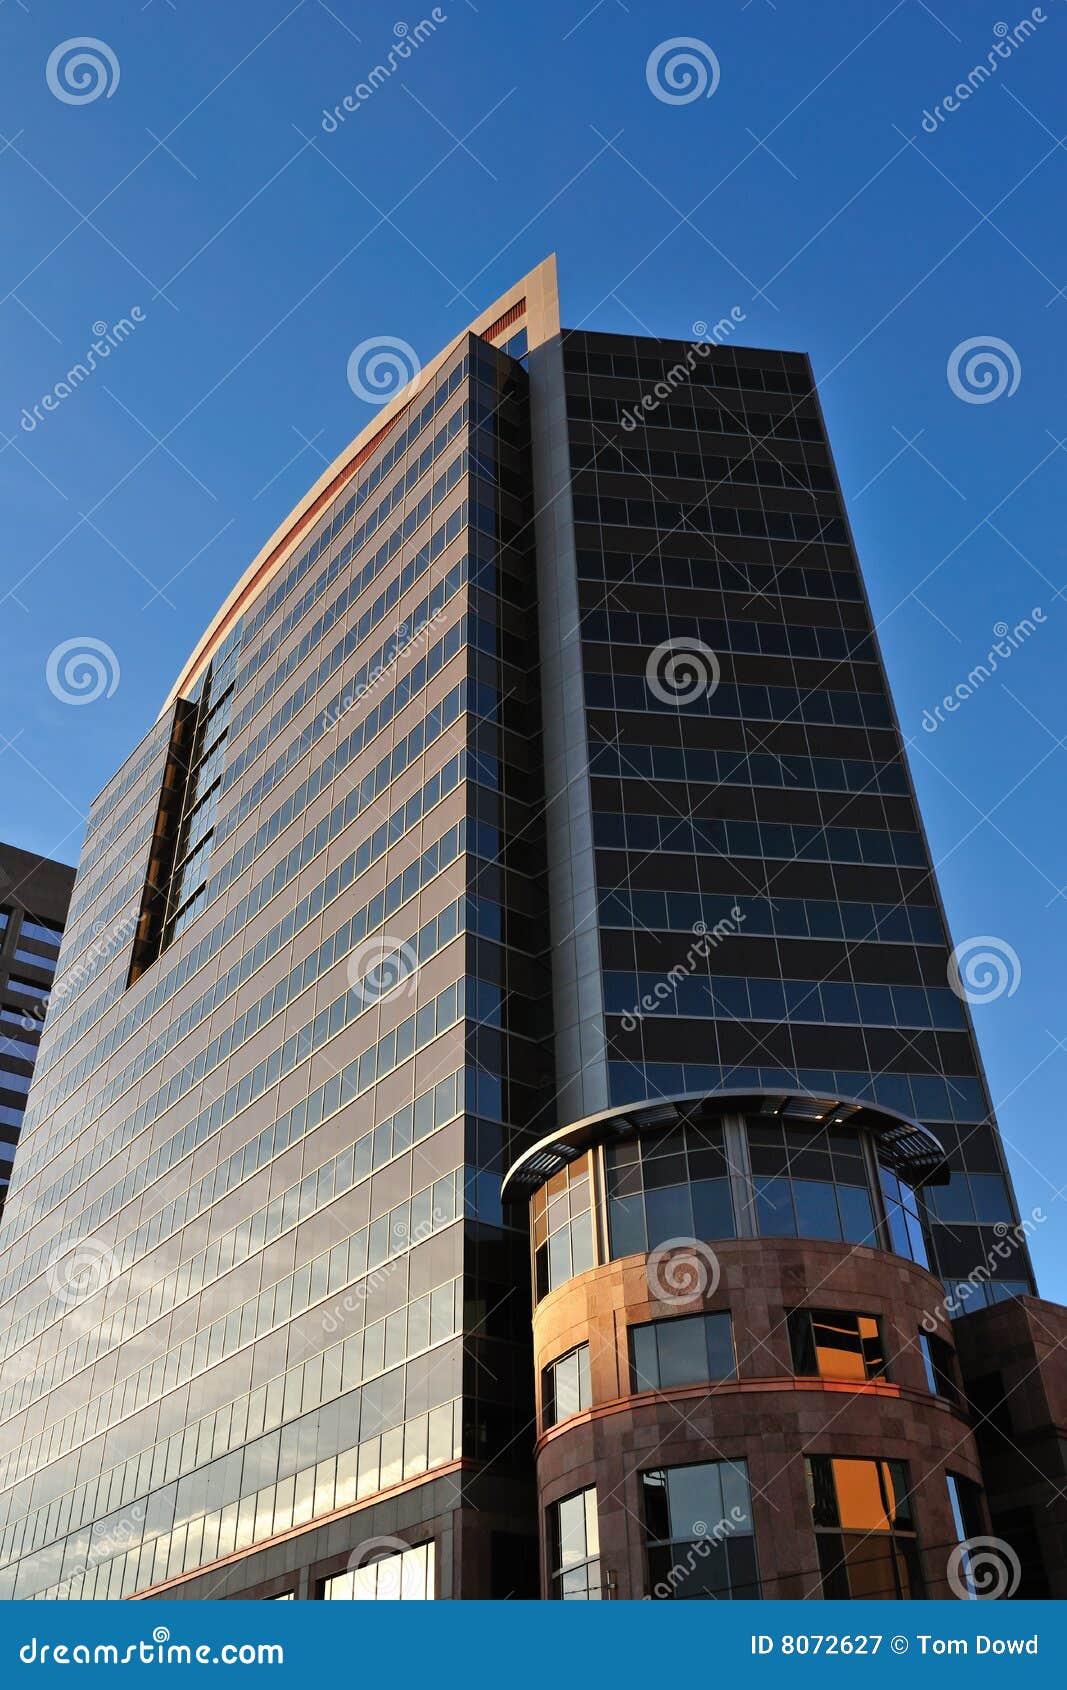 high rise office building